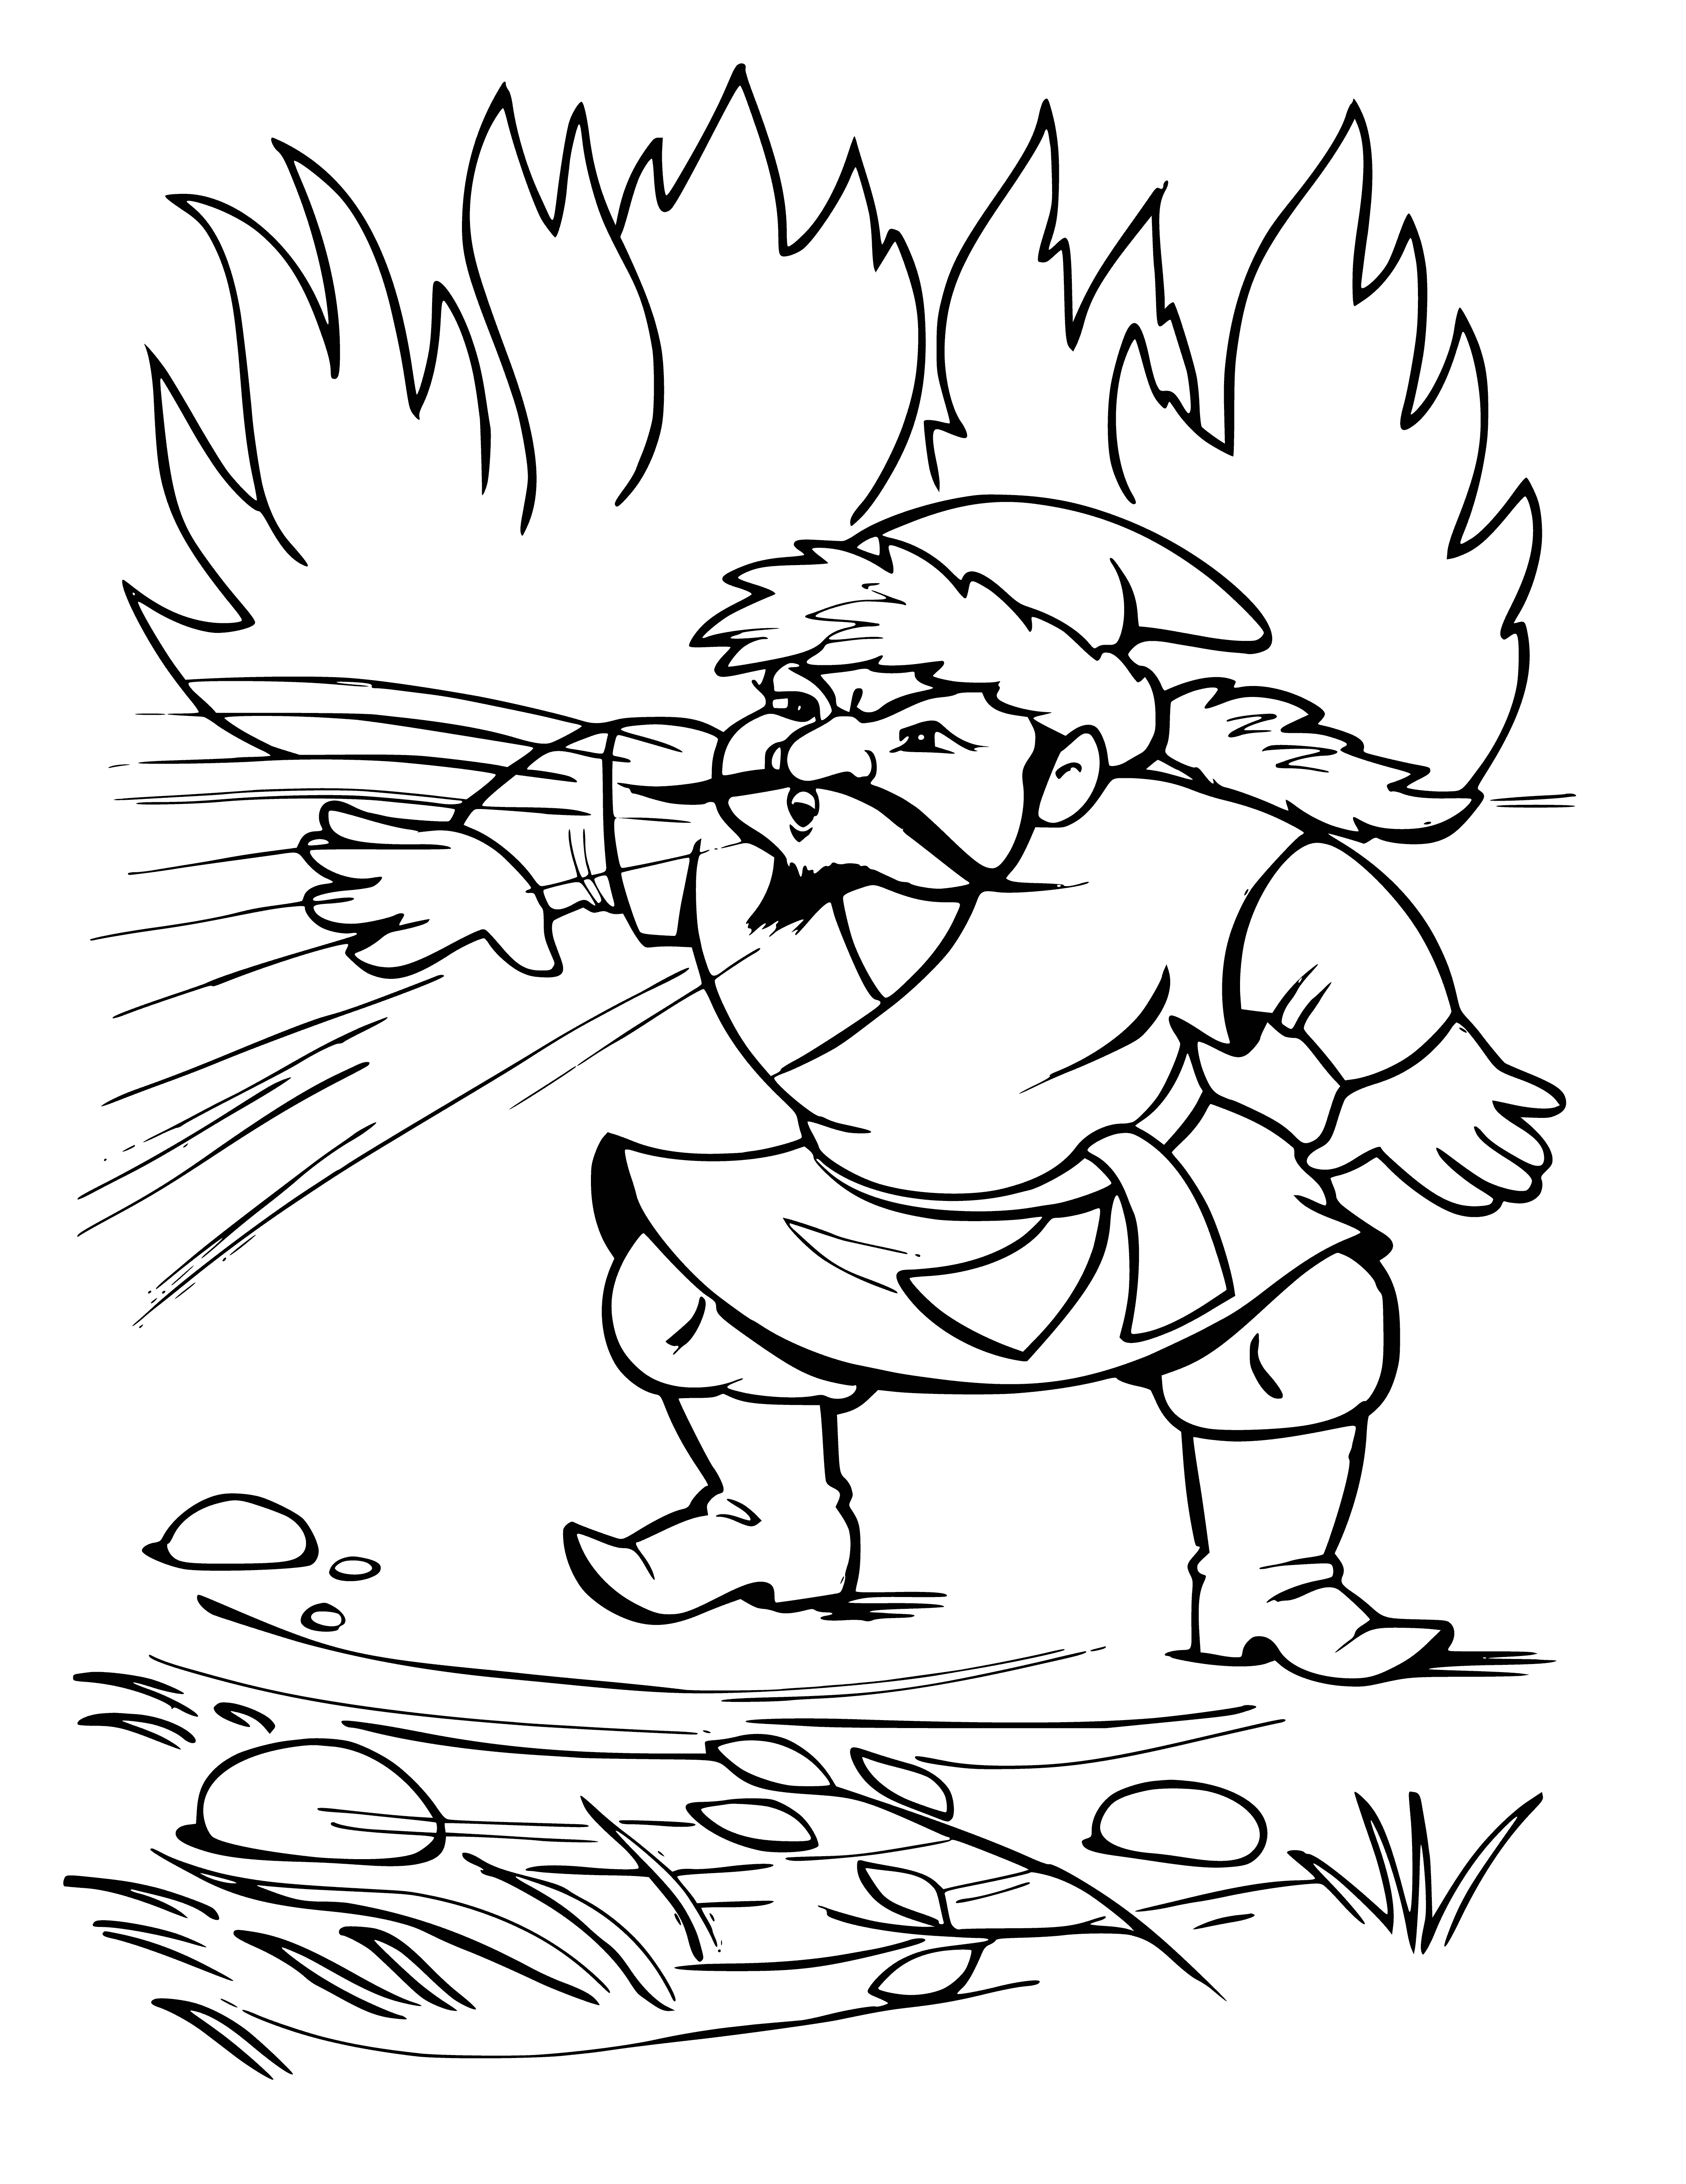 Nightingale whistled coloring page